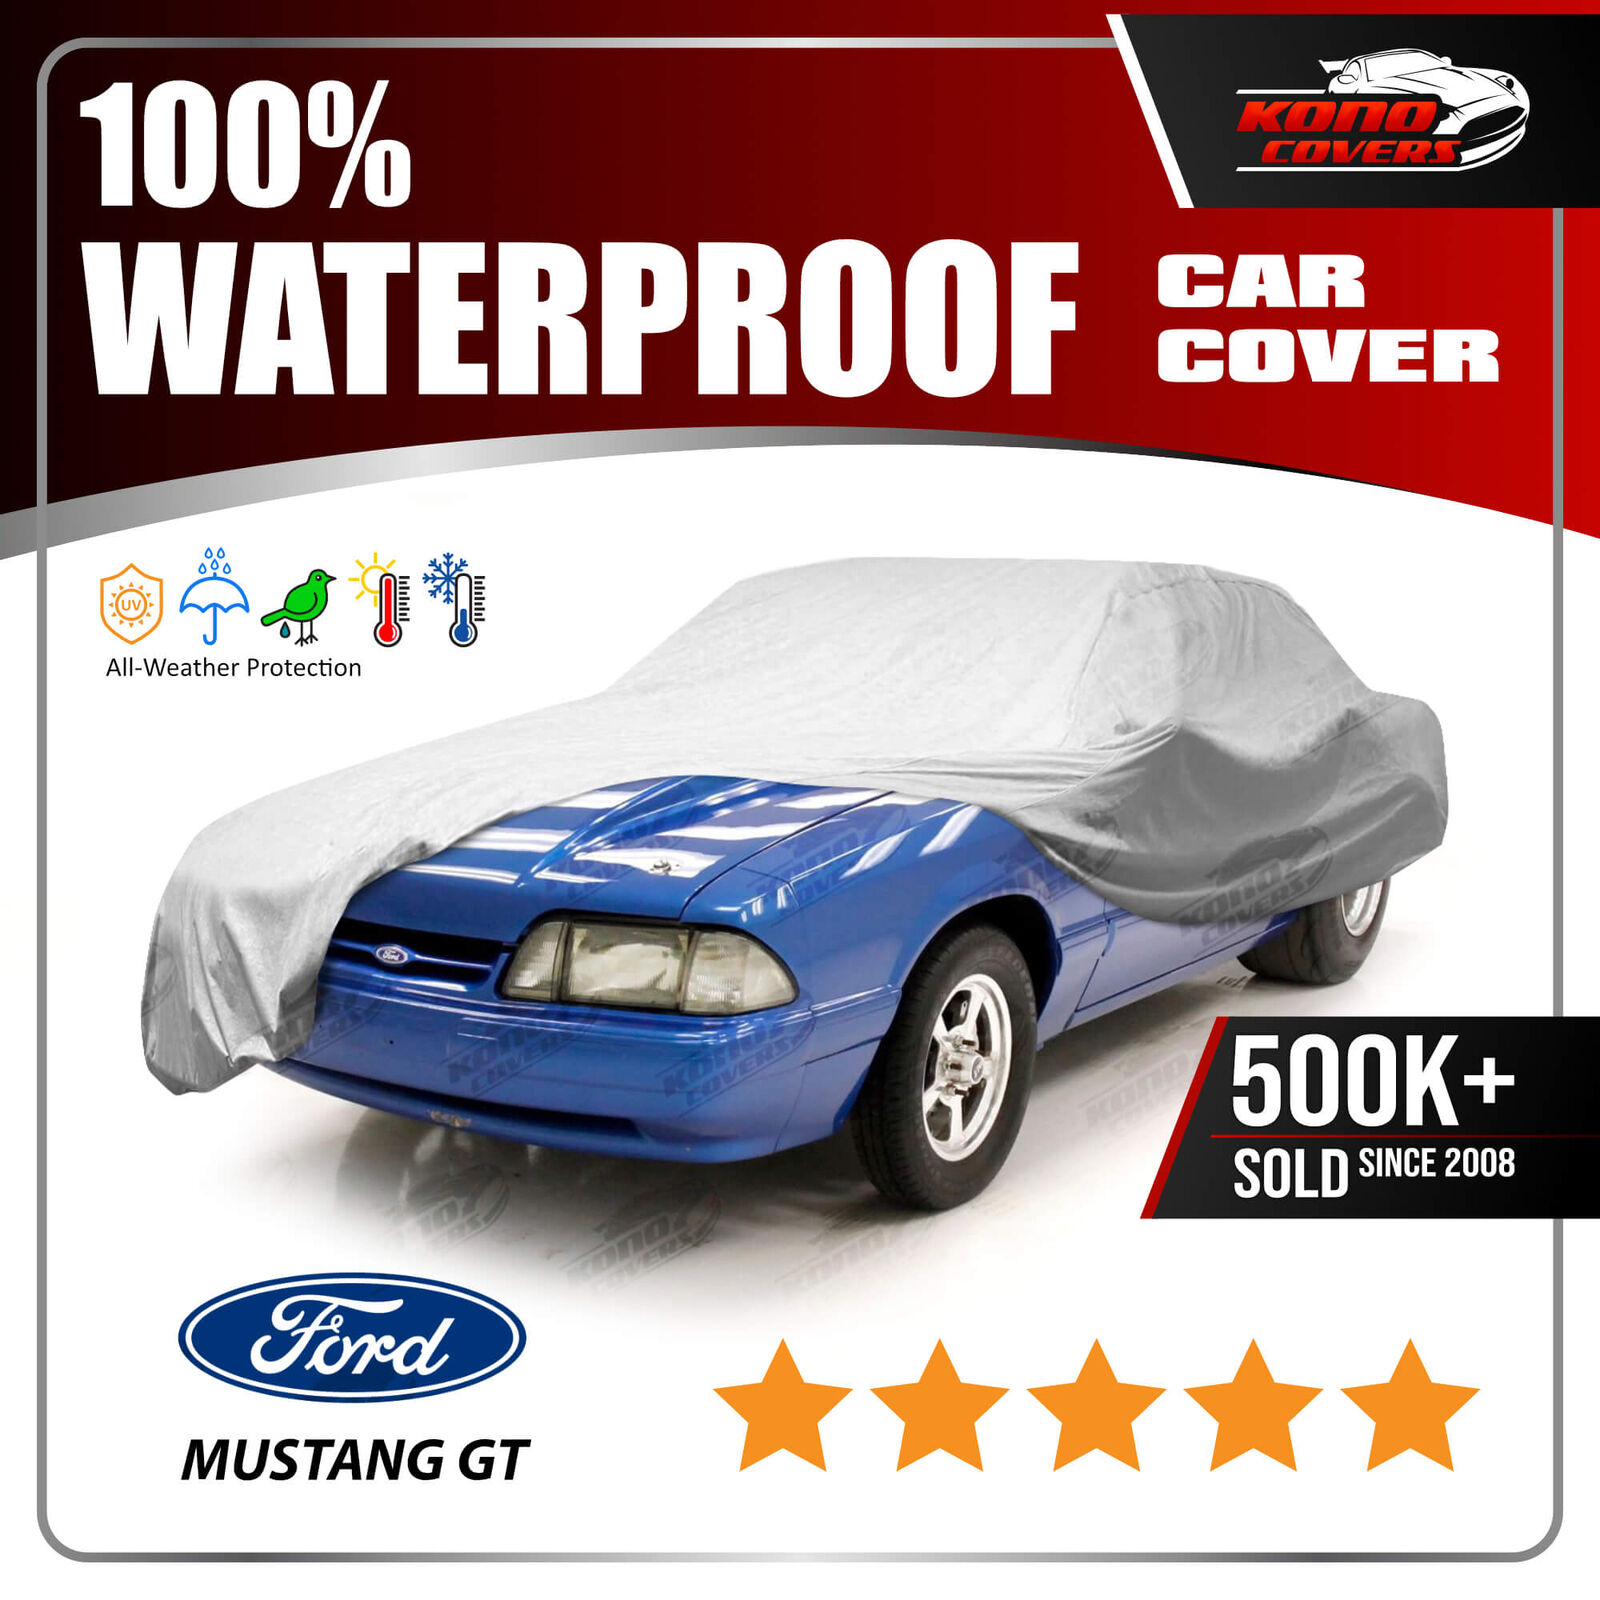 FORD MUSTANG GT 1987-1993 CAR COVER - 100% Waterproof 100% Breathable